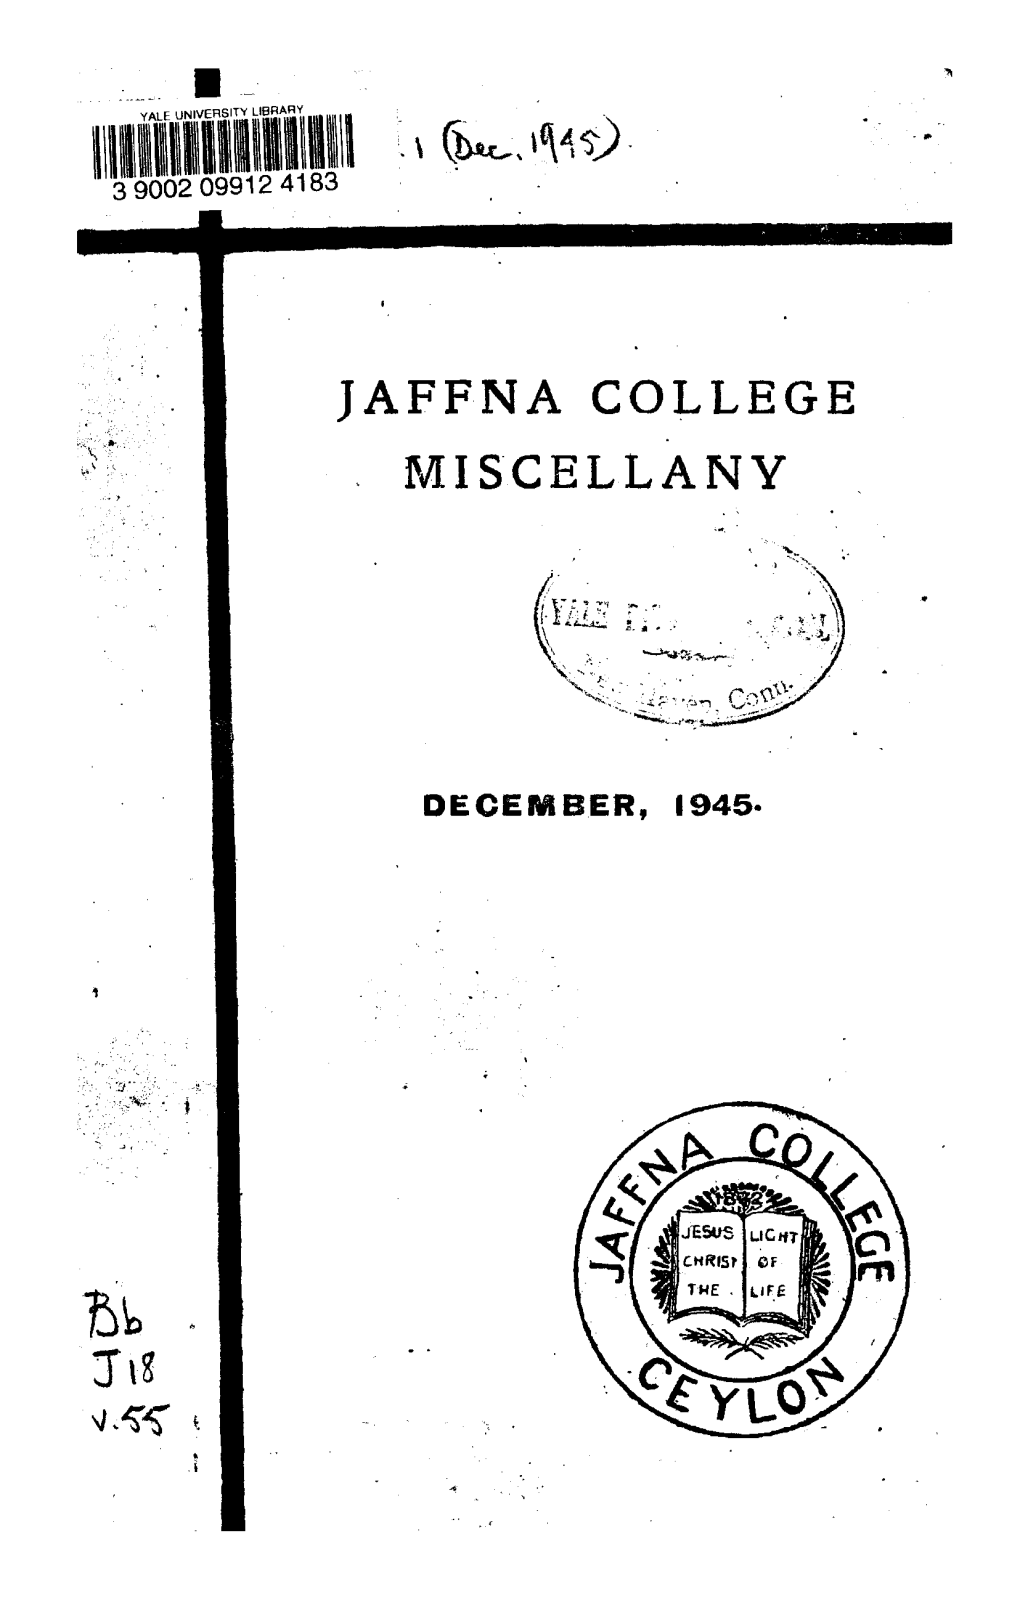 Jaffna College Miscellany December, 1945